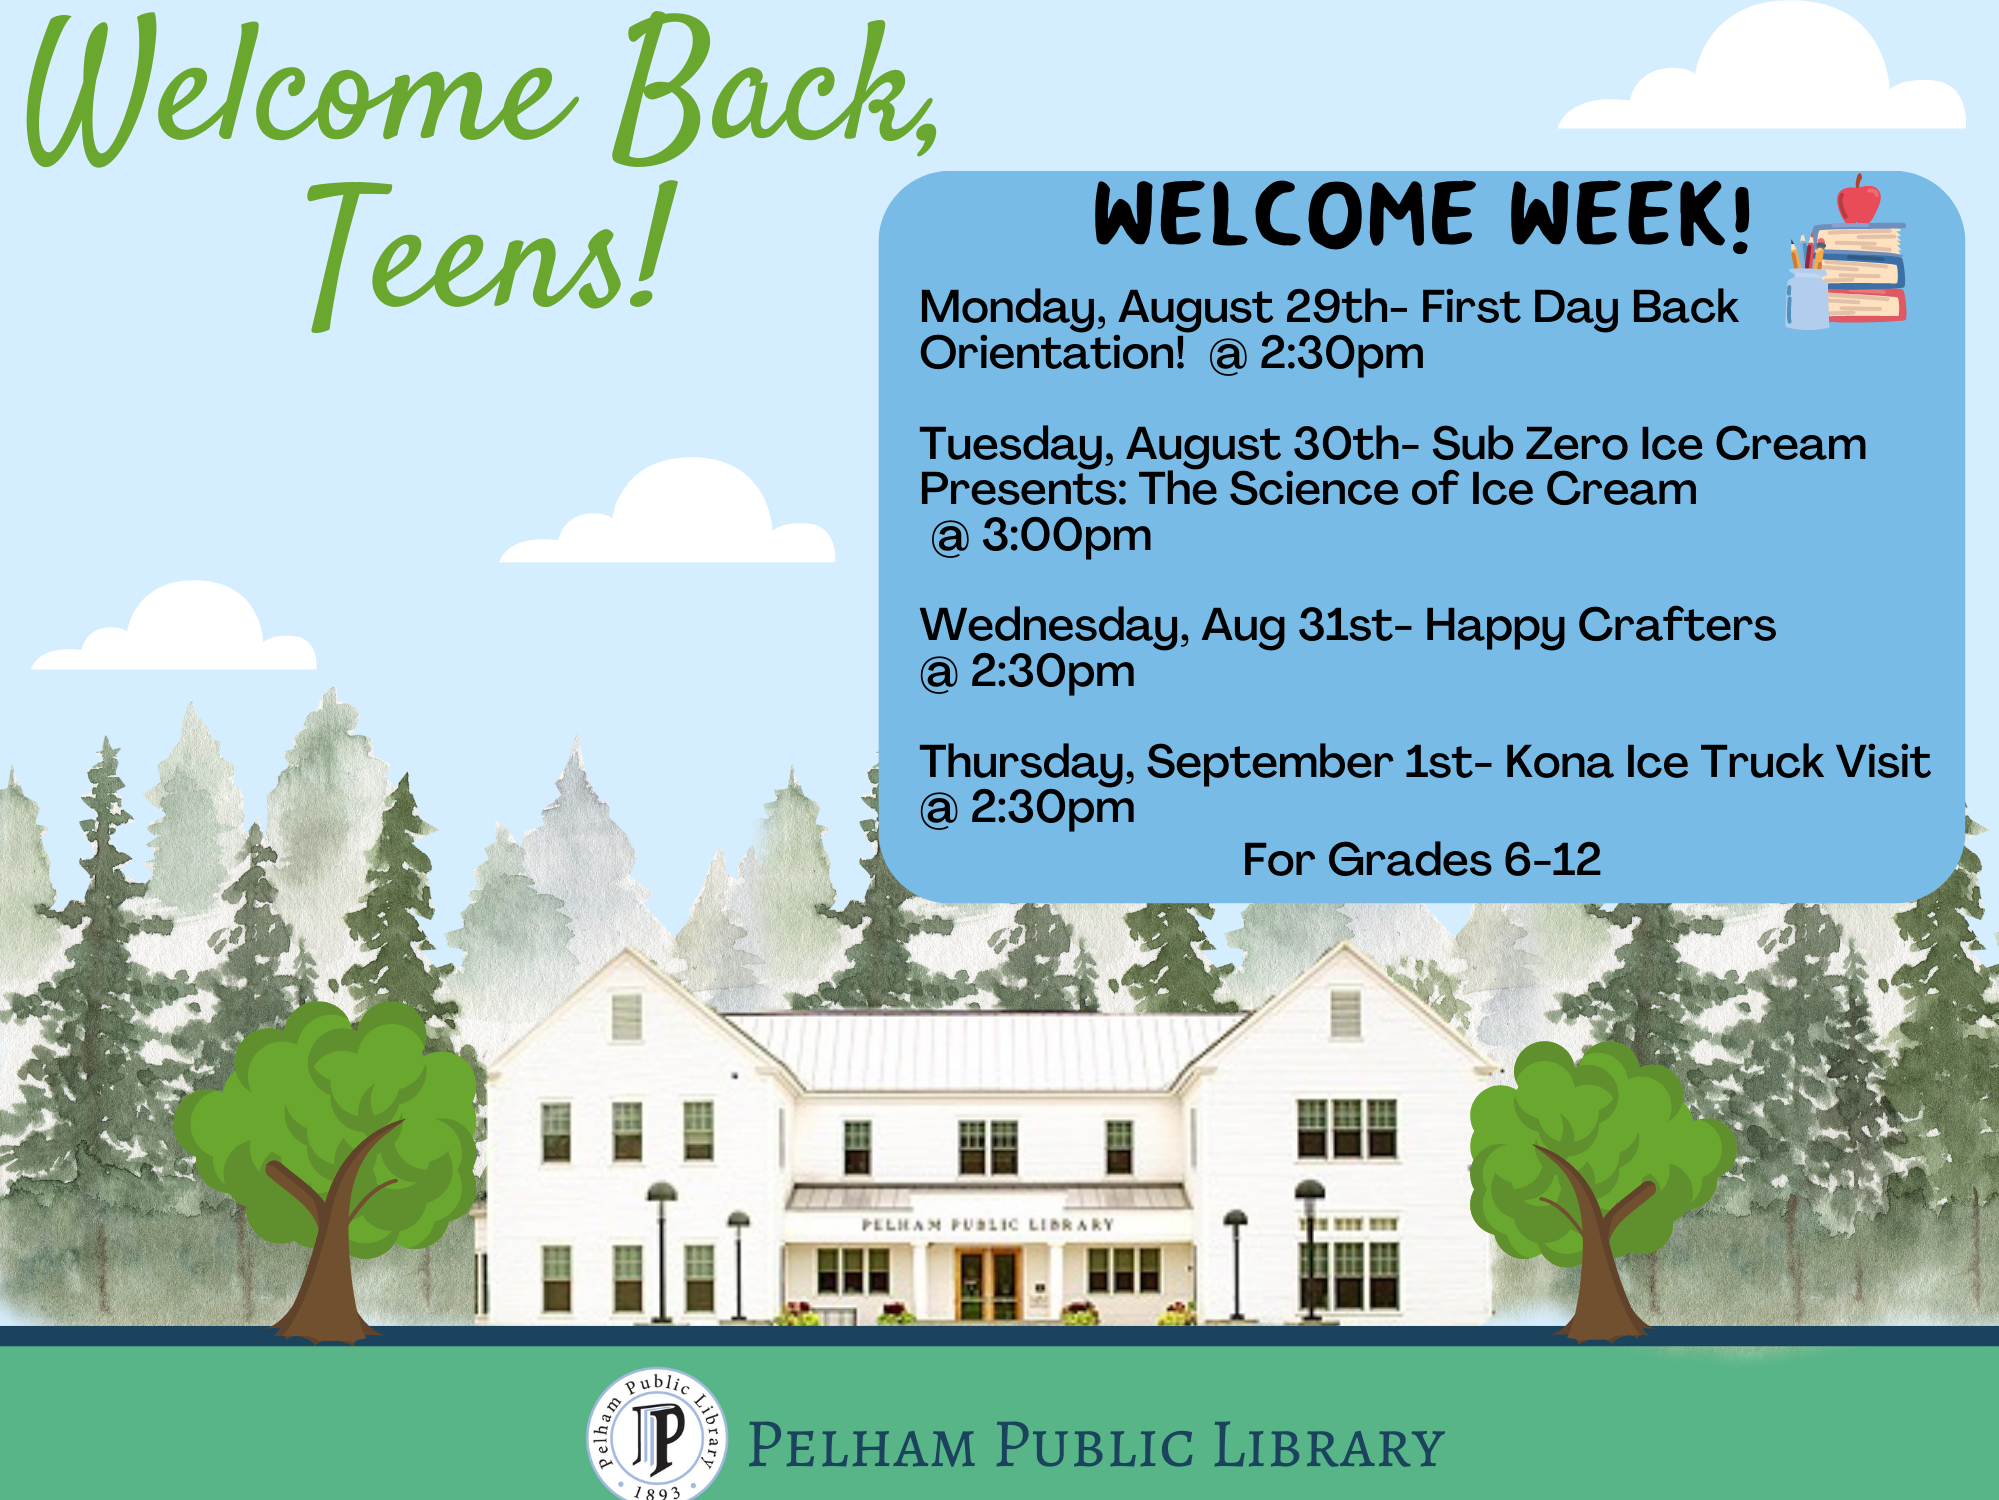 welcome back teens with image of library